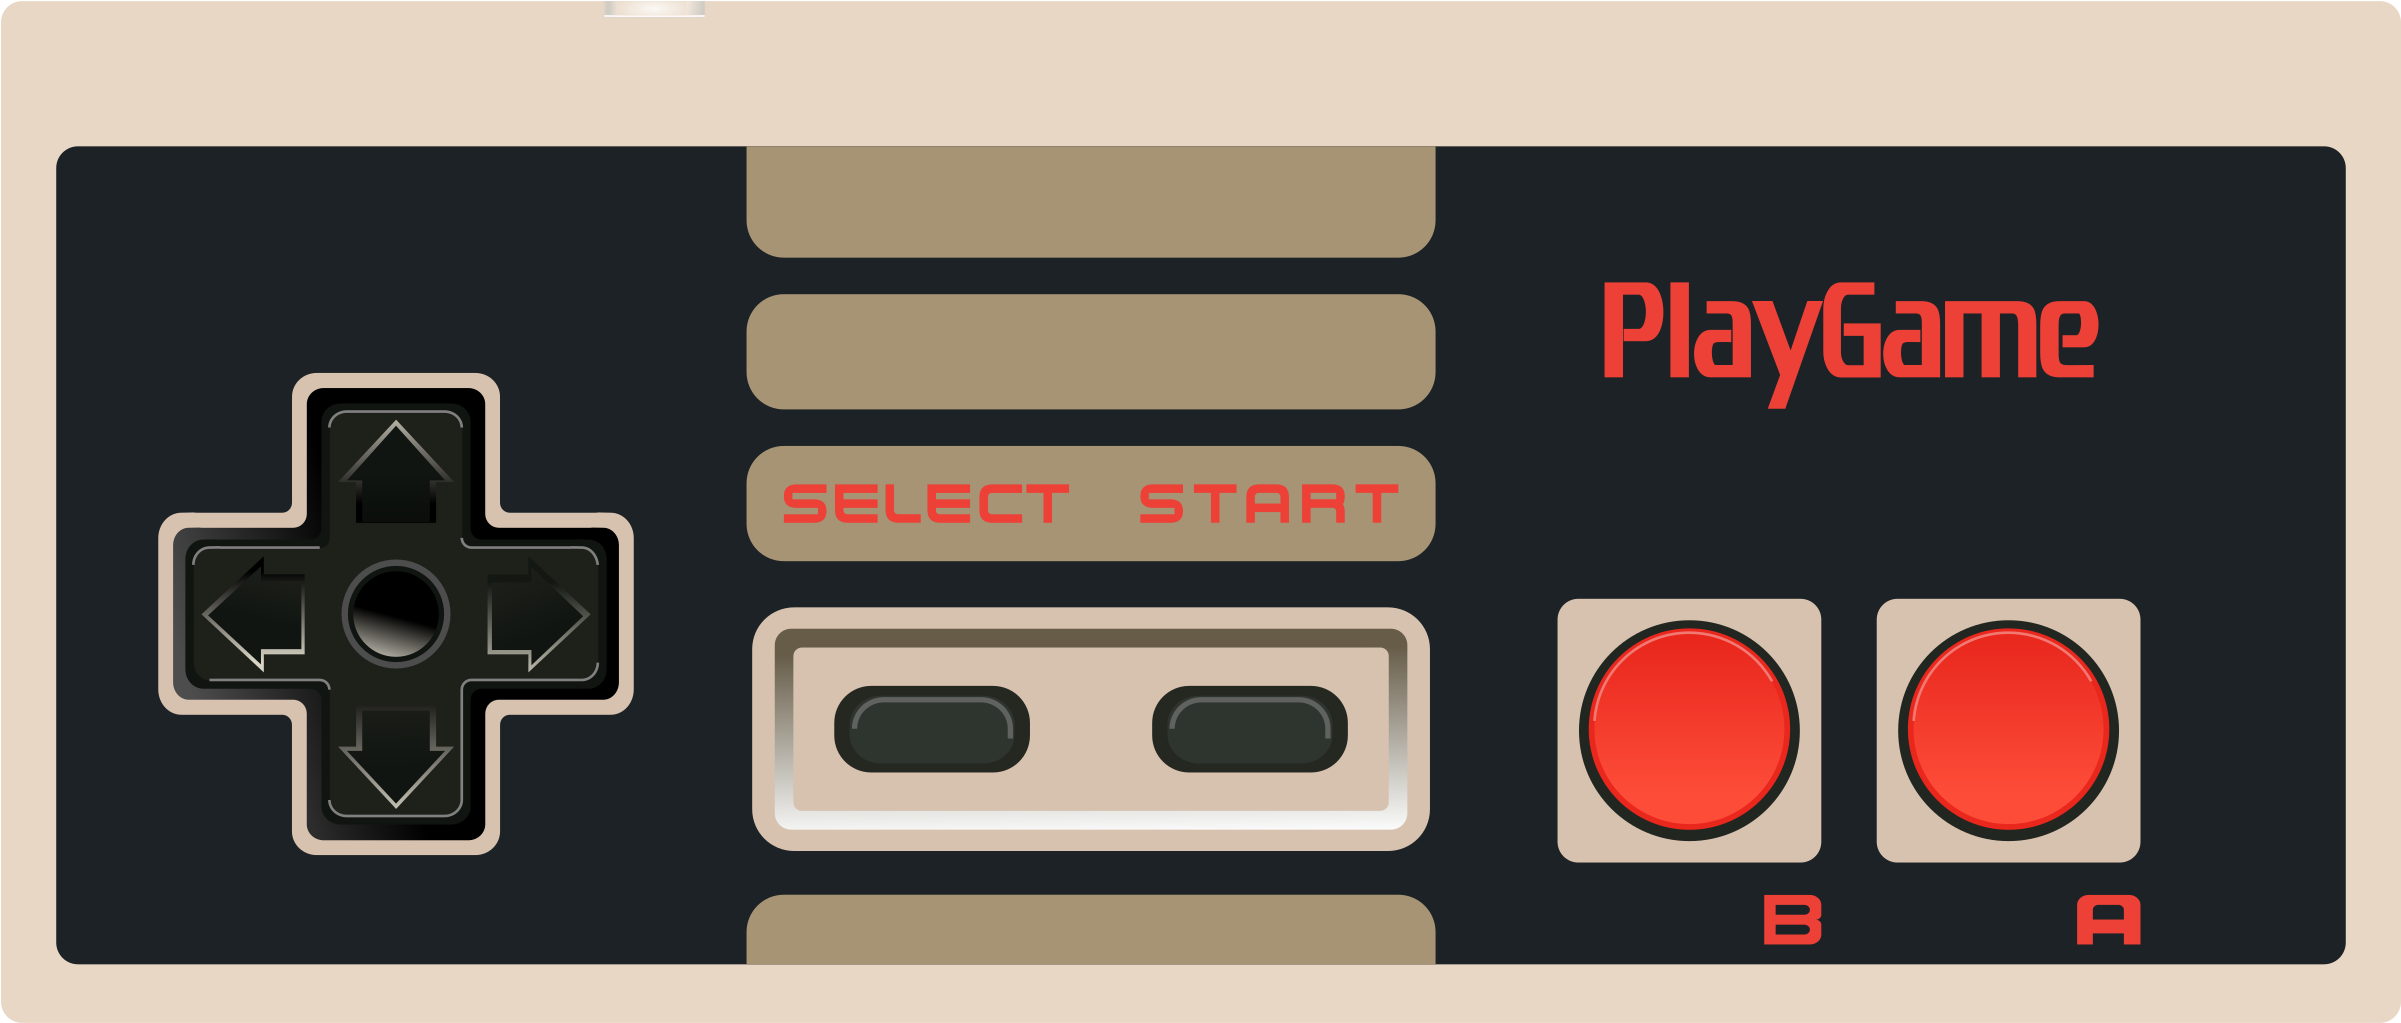 This Free Icons Png Design Of Nes Controller